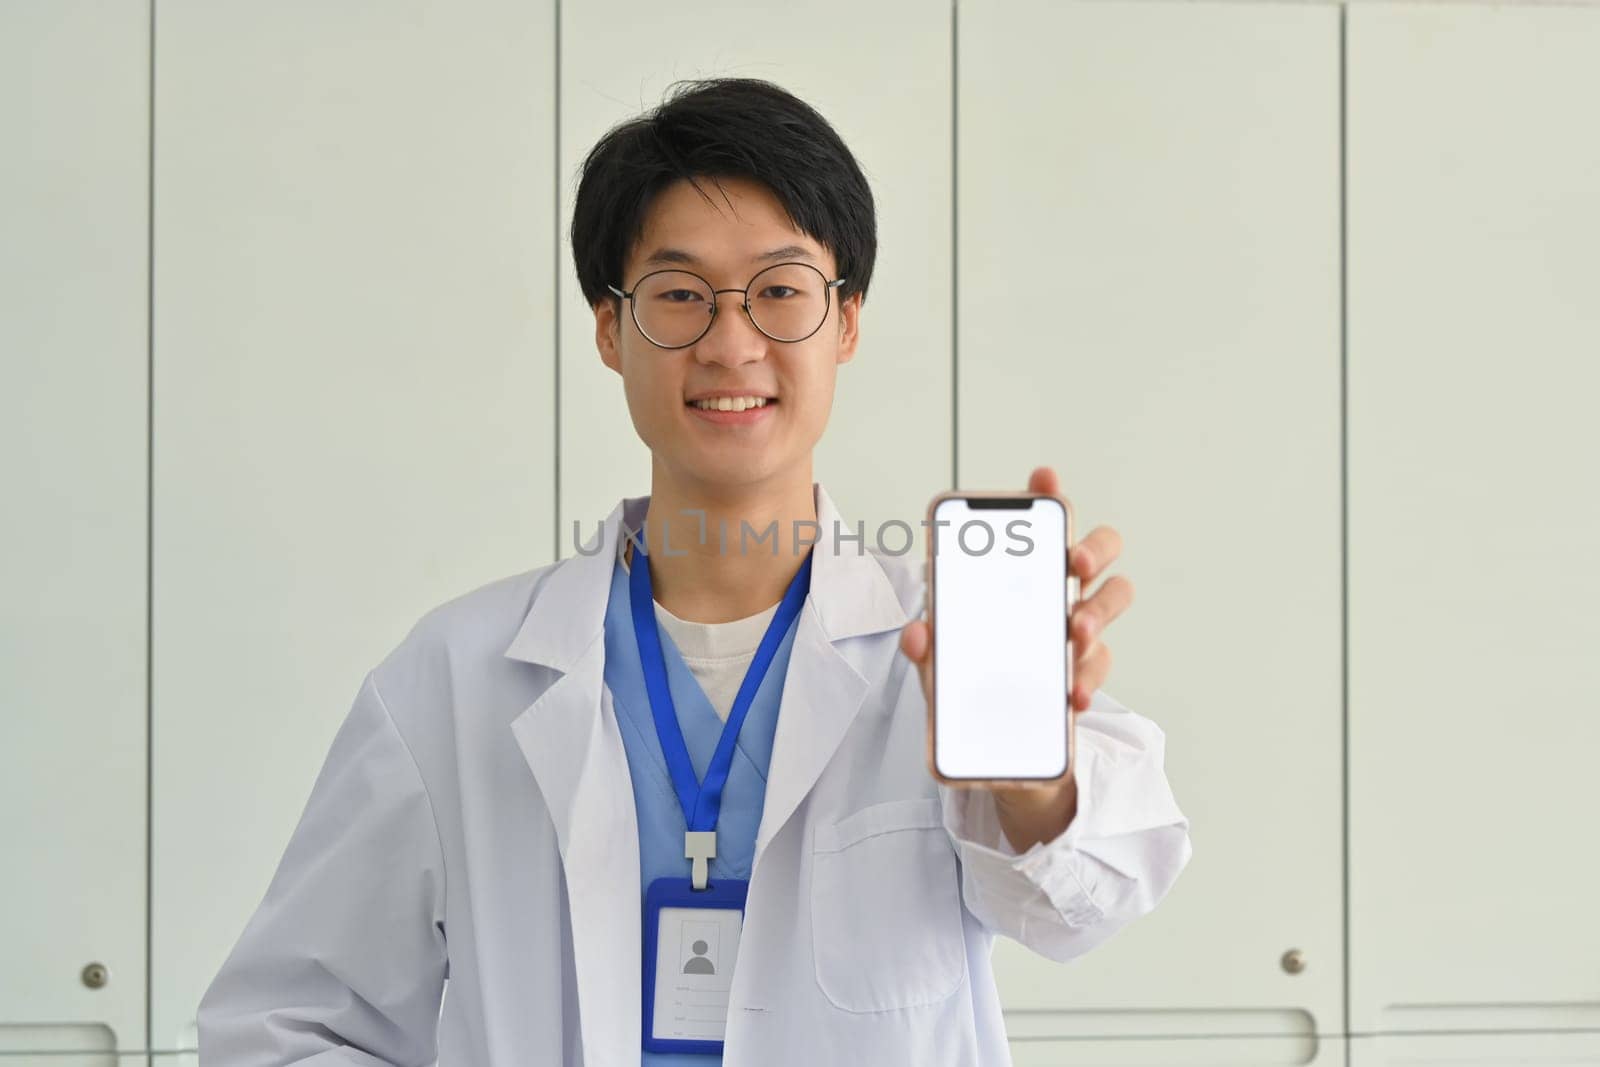 Doctor wearing white uniform showing smartphone with blank screen. Telehealth online applications concept.